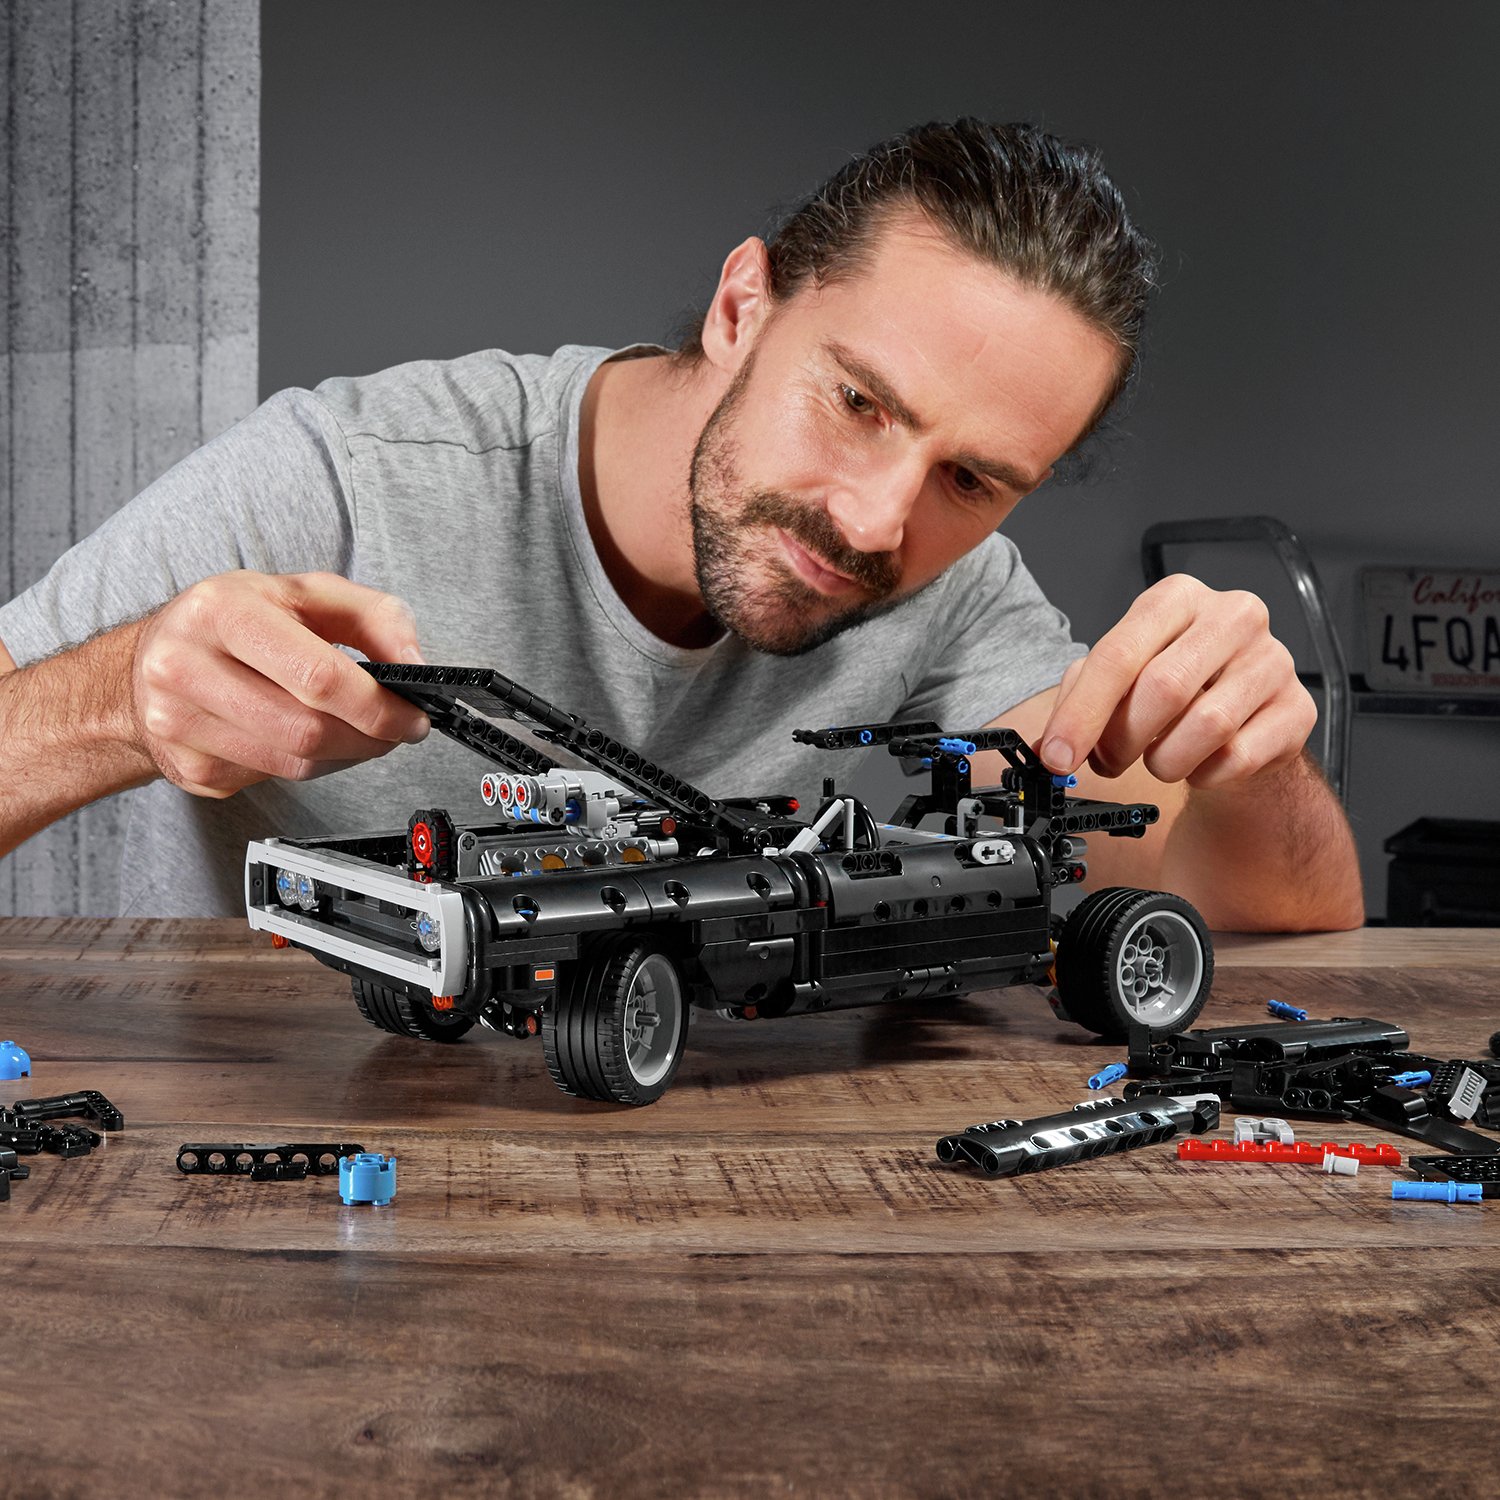 LEGO Technic Fast & Furious Dom's Dodge Charger Set Review